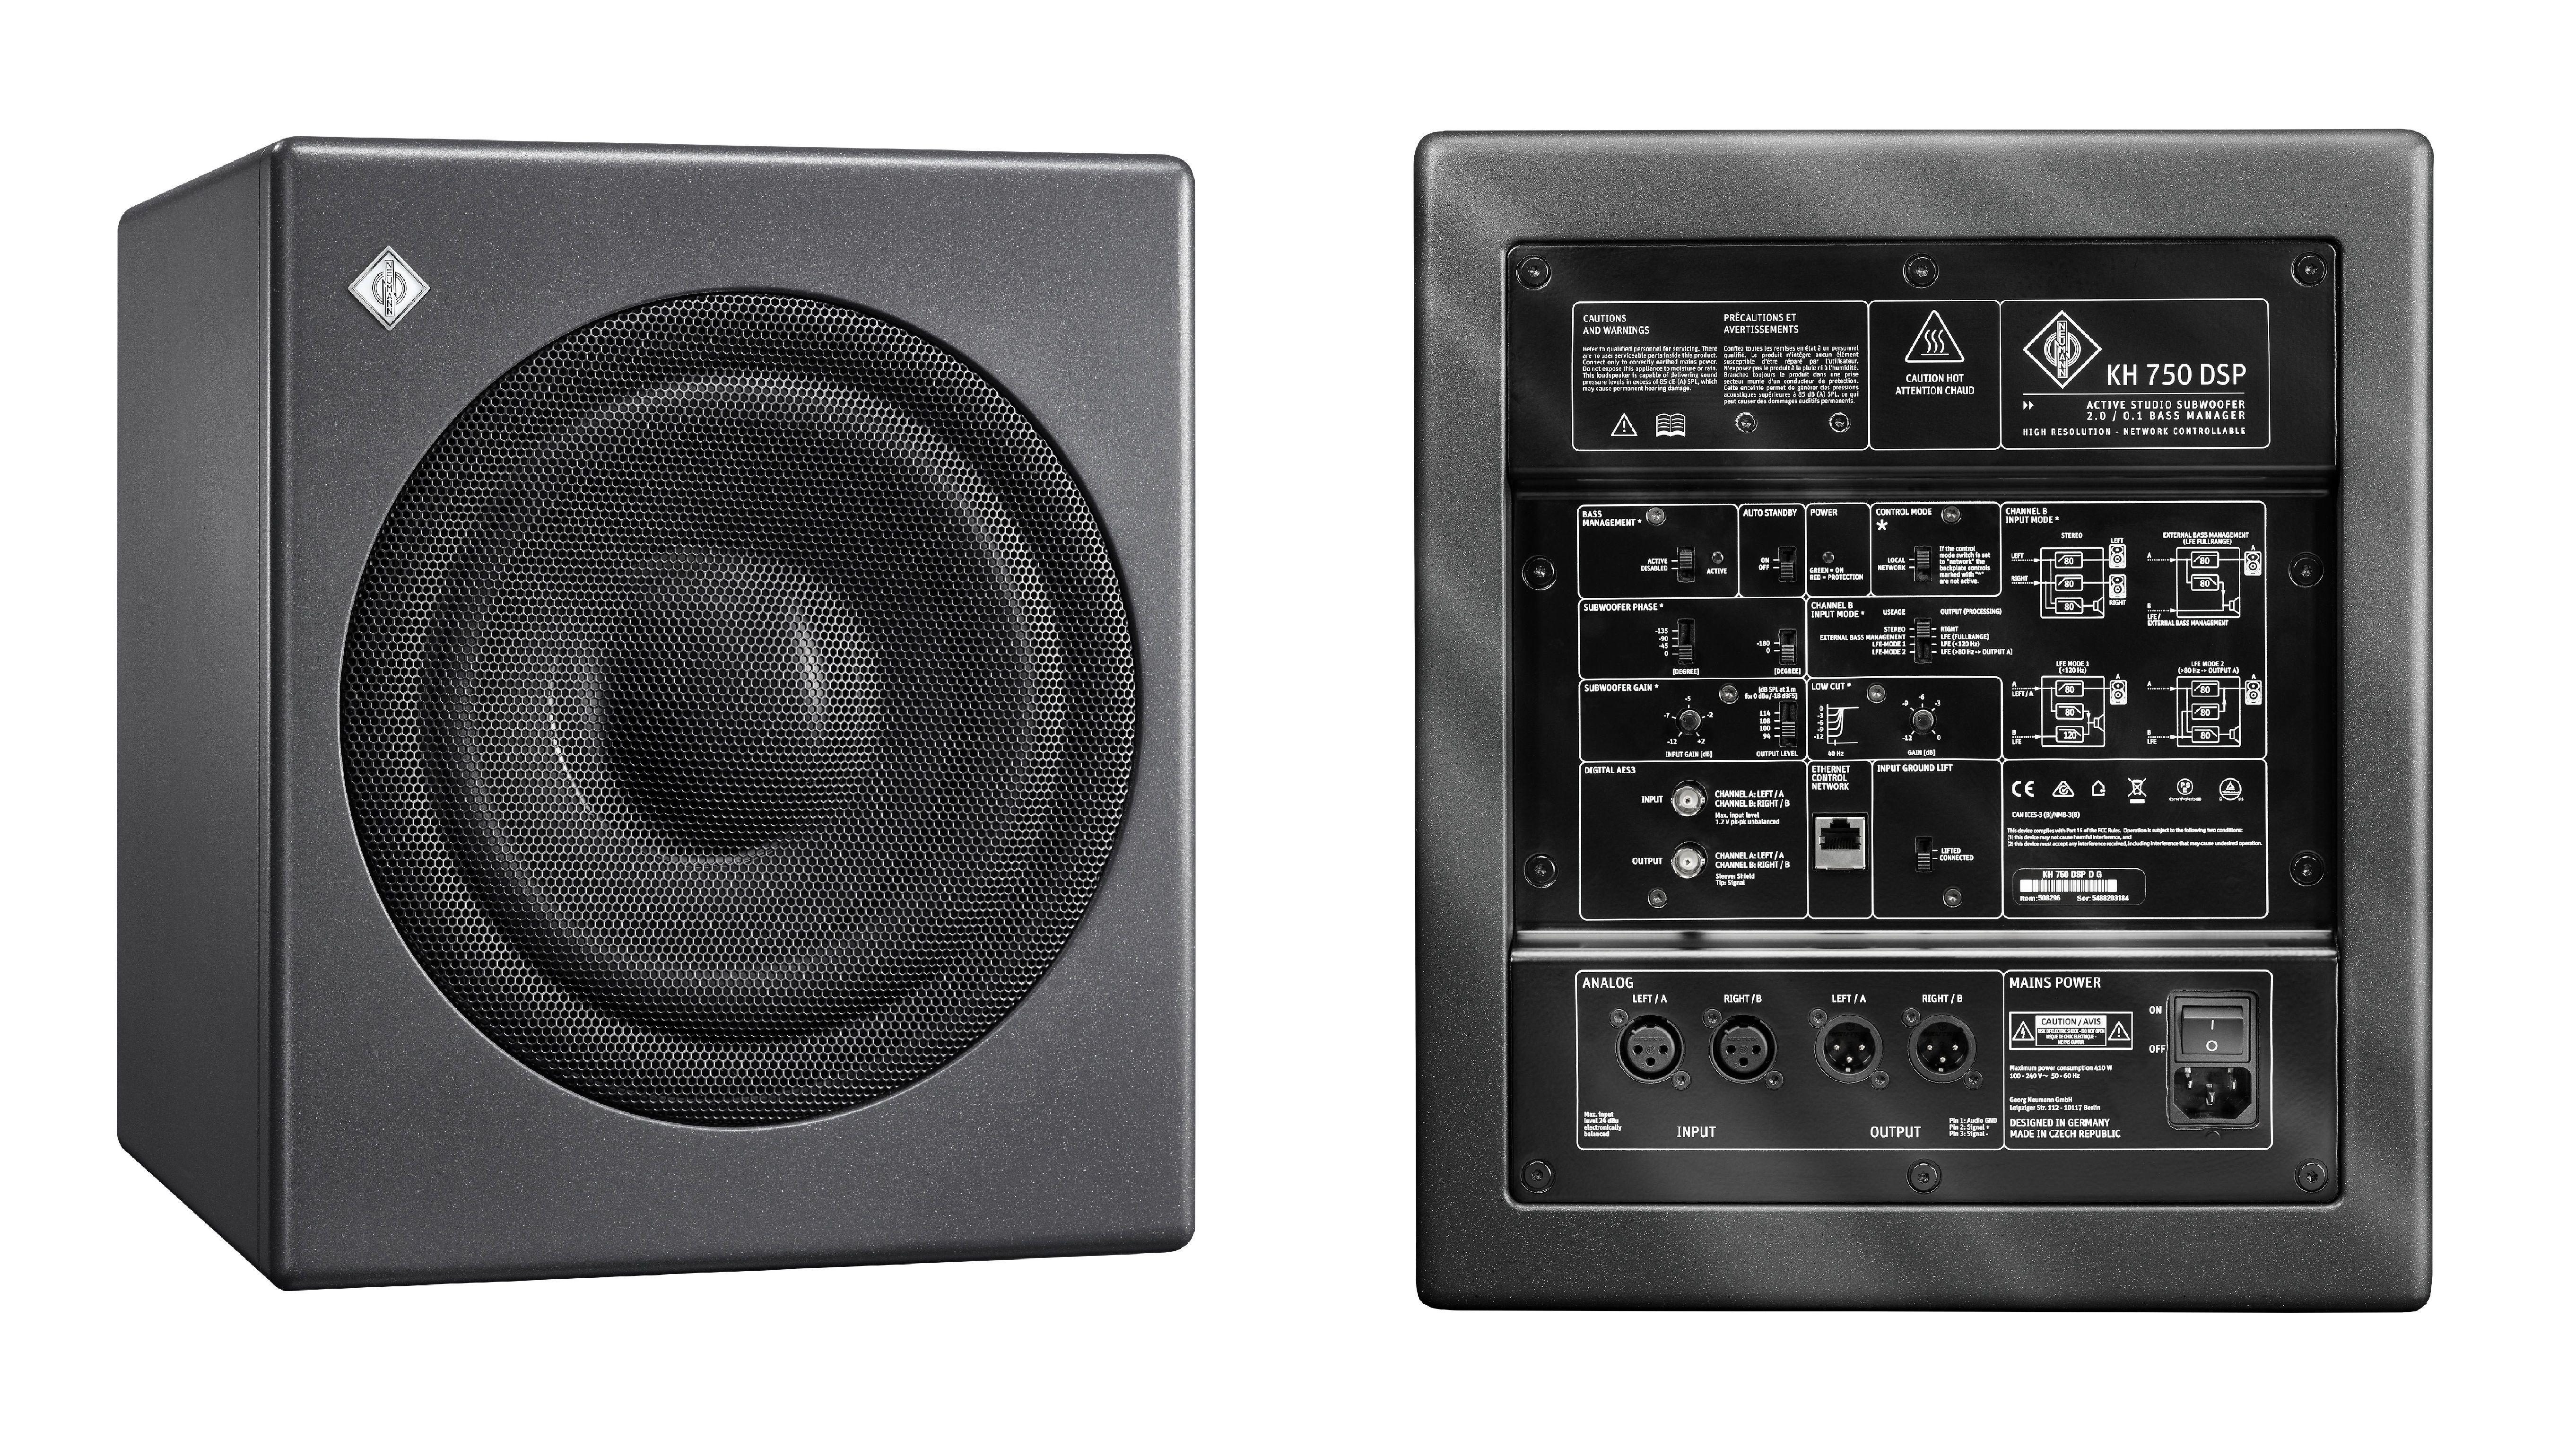 The new KH 750 DSP is a particularly compact subwoofer for broadcast, music and post production studios